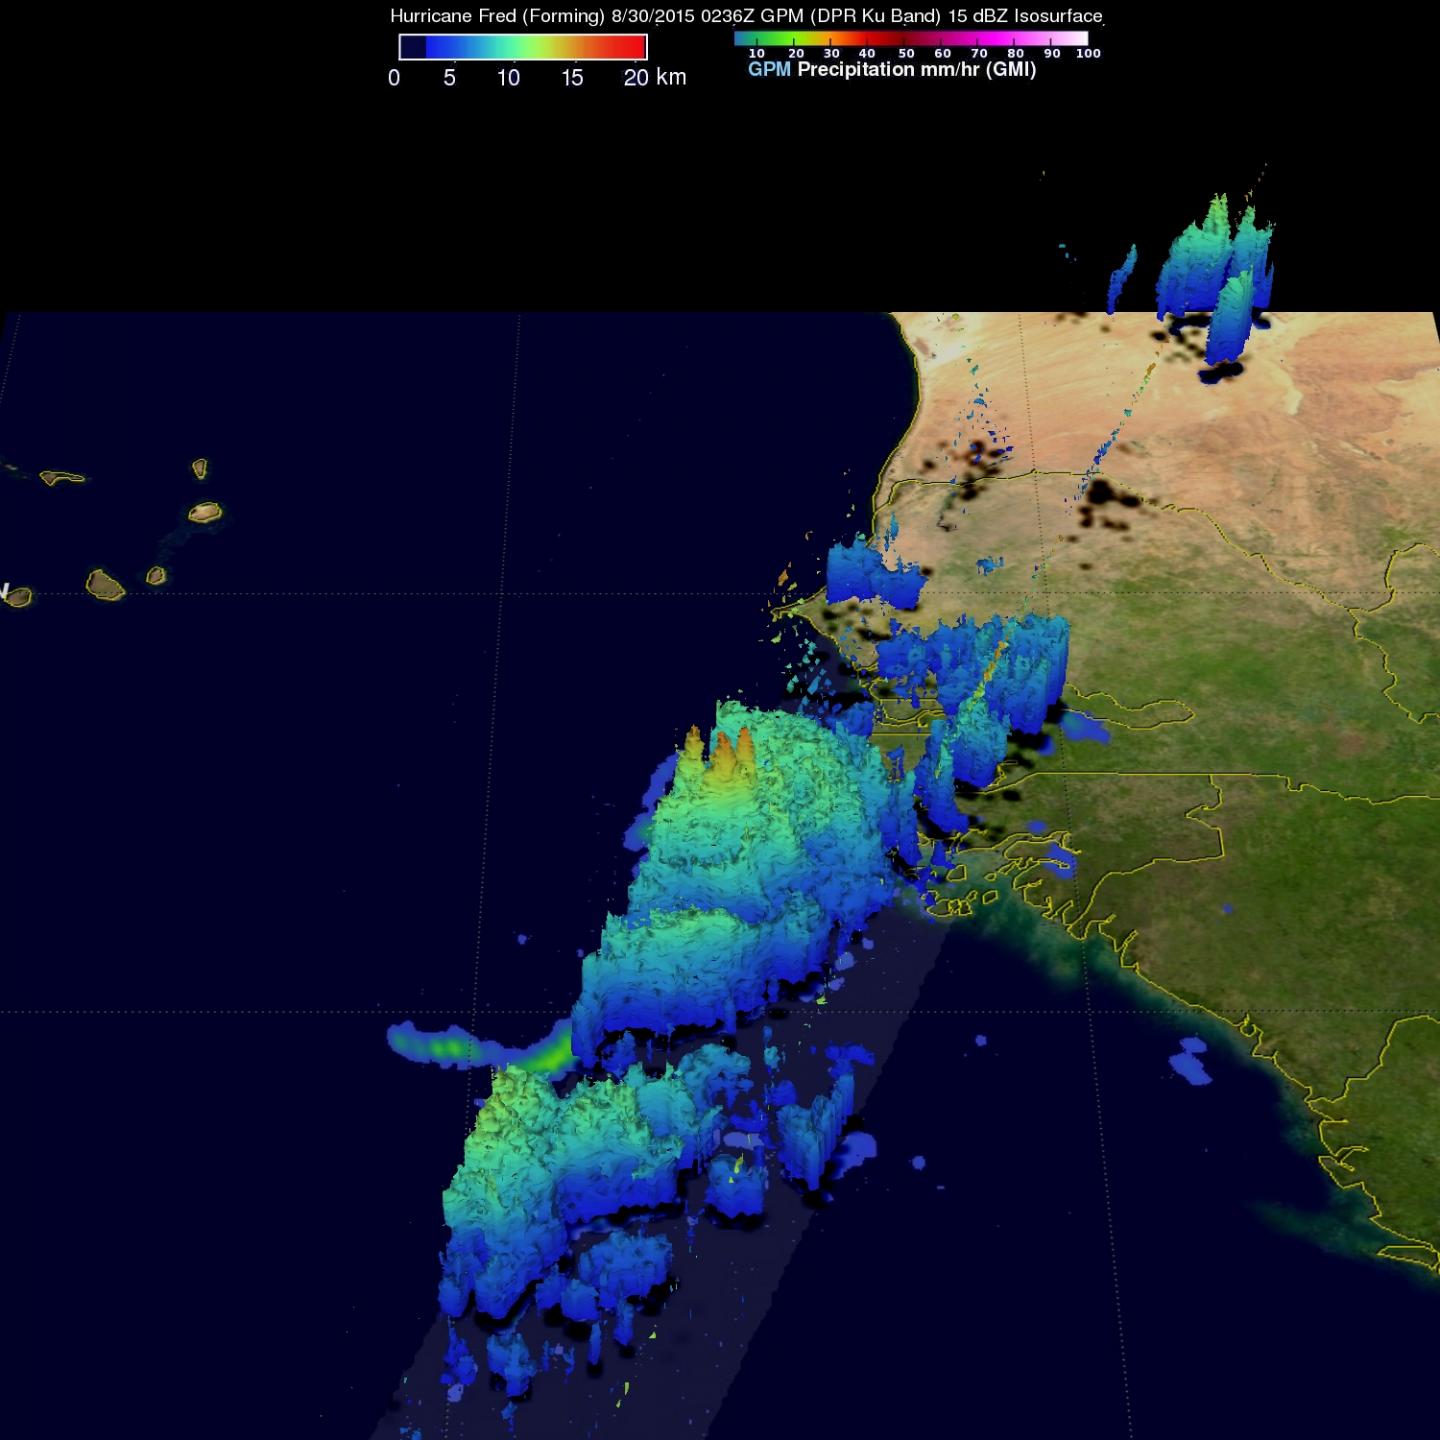 GPM Image of Fred